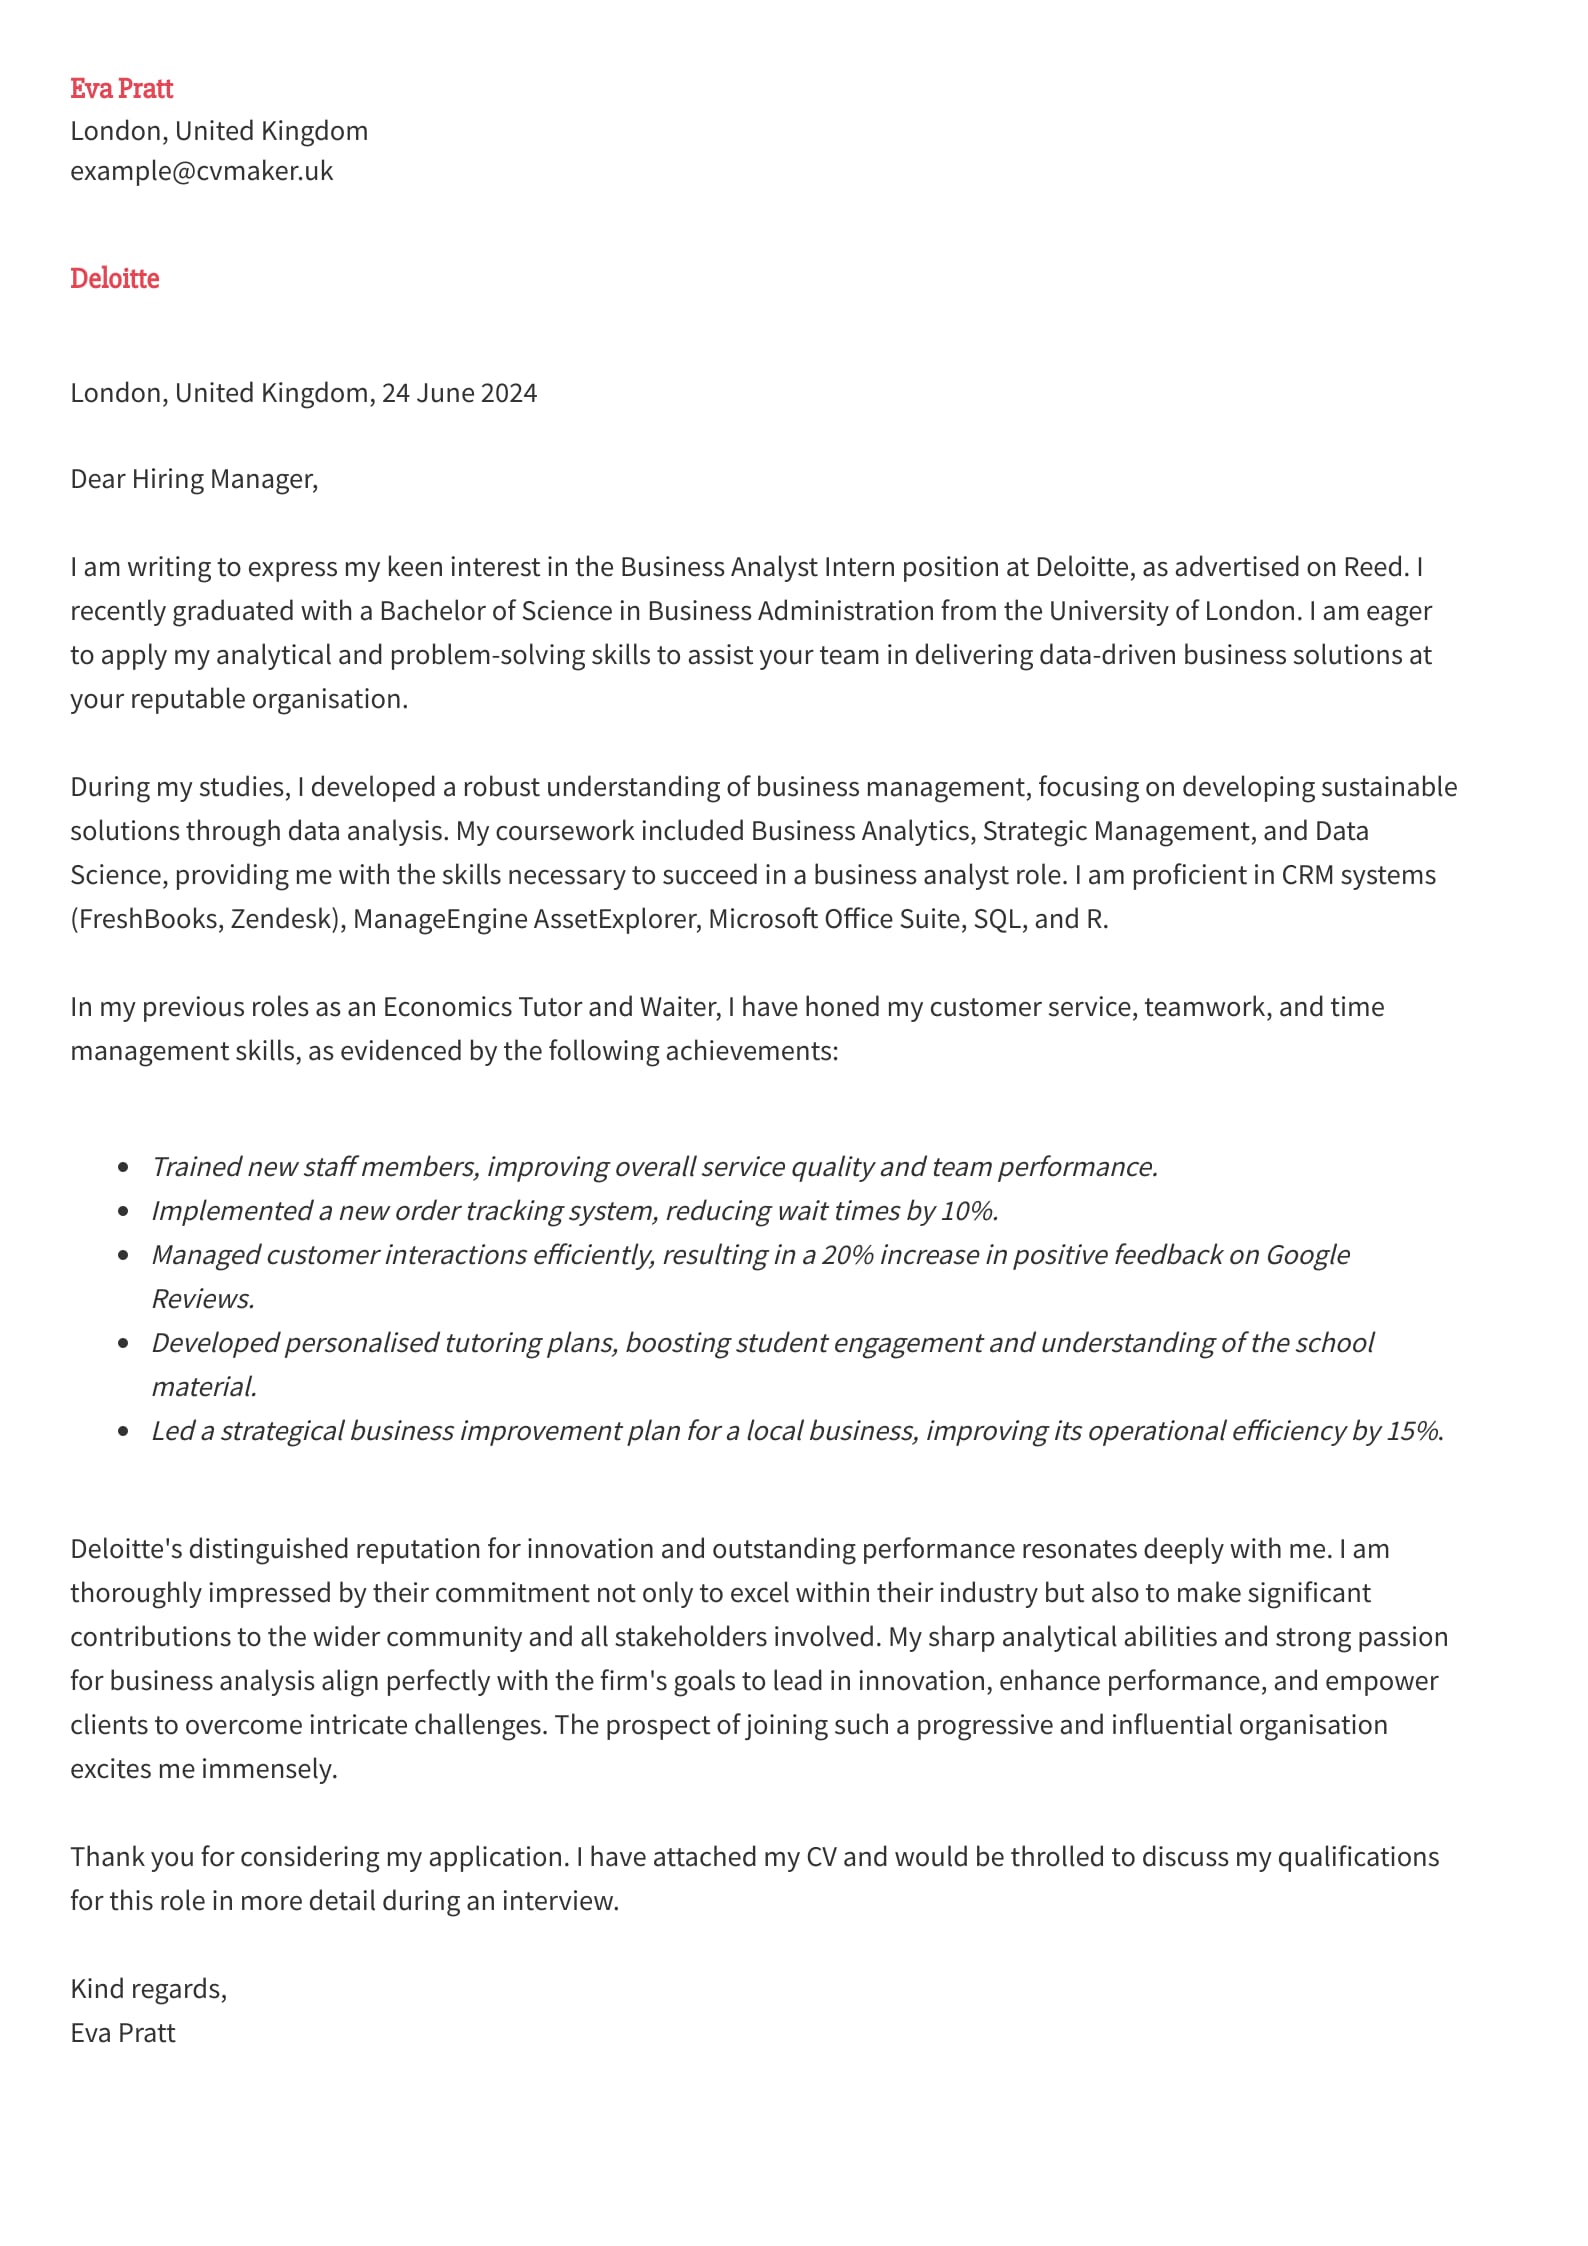 Cover letter example for internship